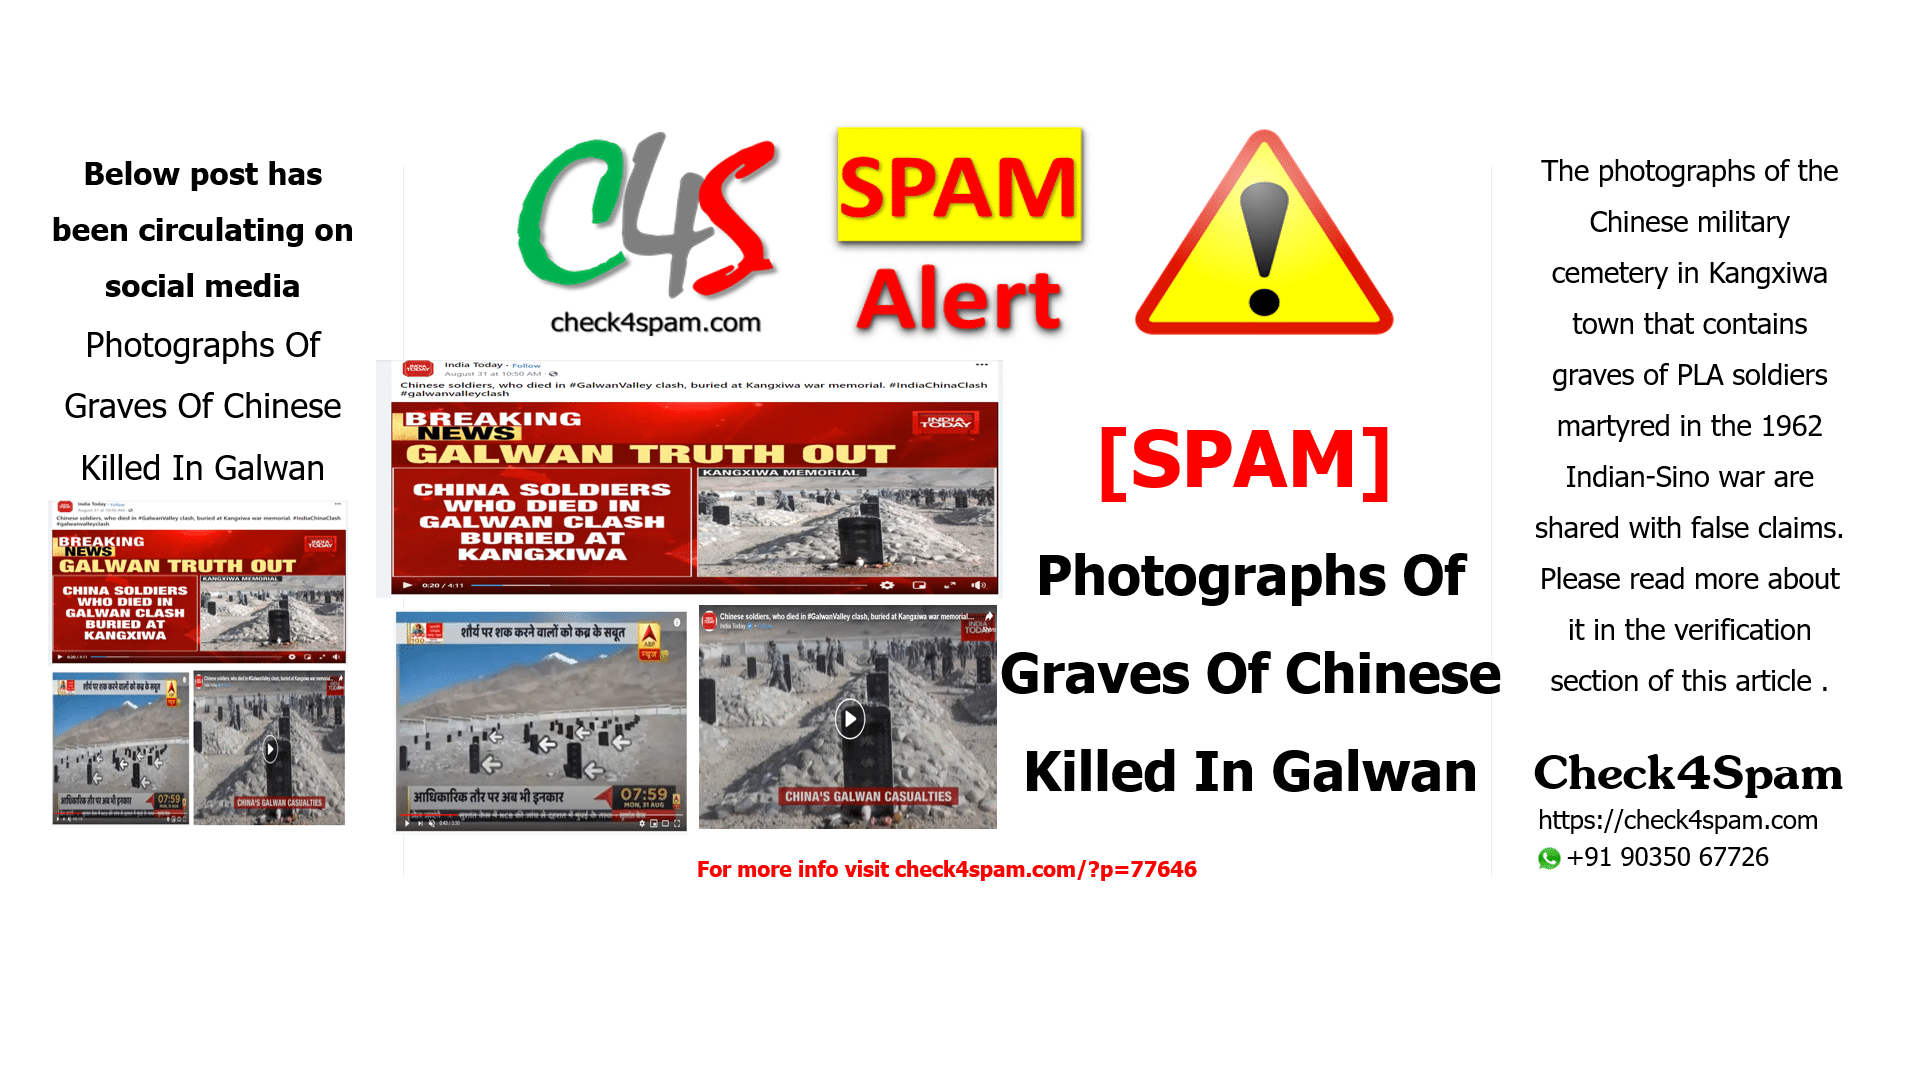 Photographs Of Graves Of Chinese Killed In Galwan